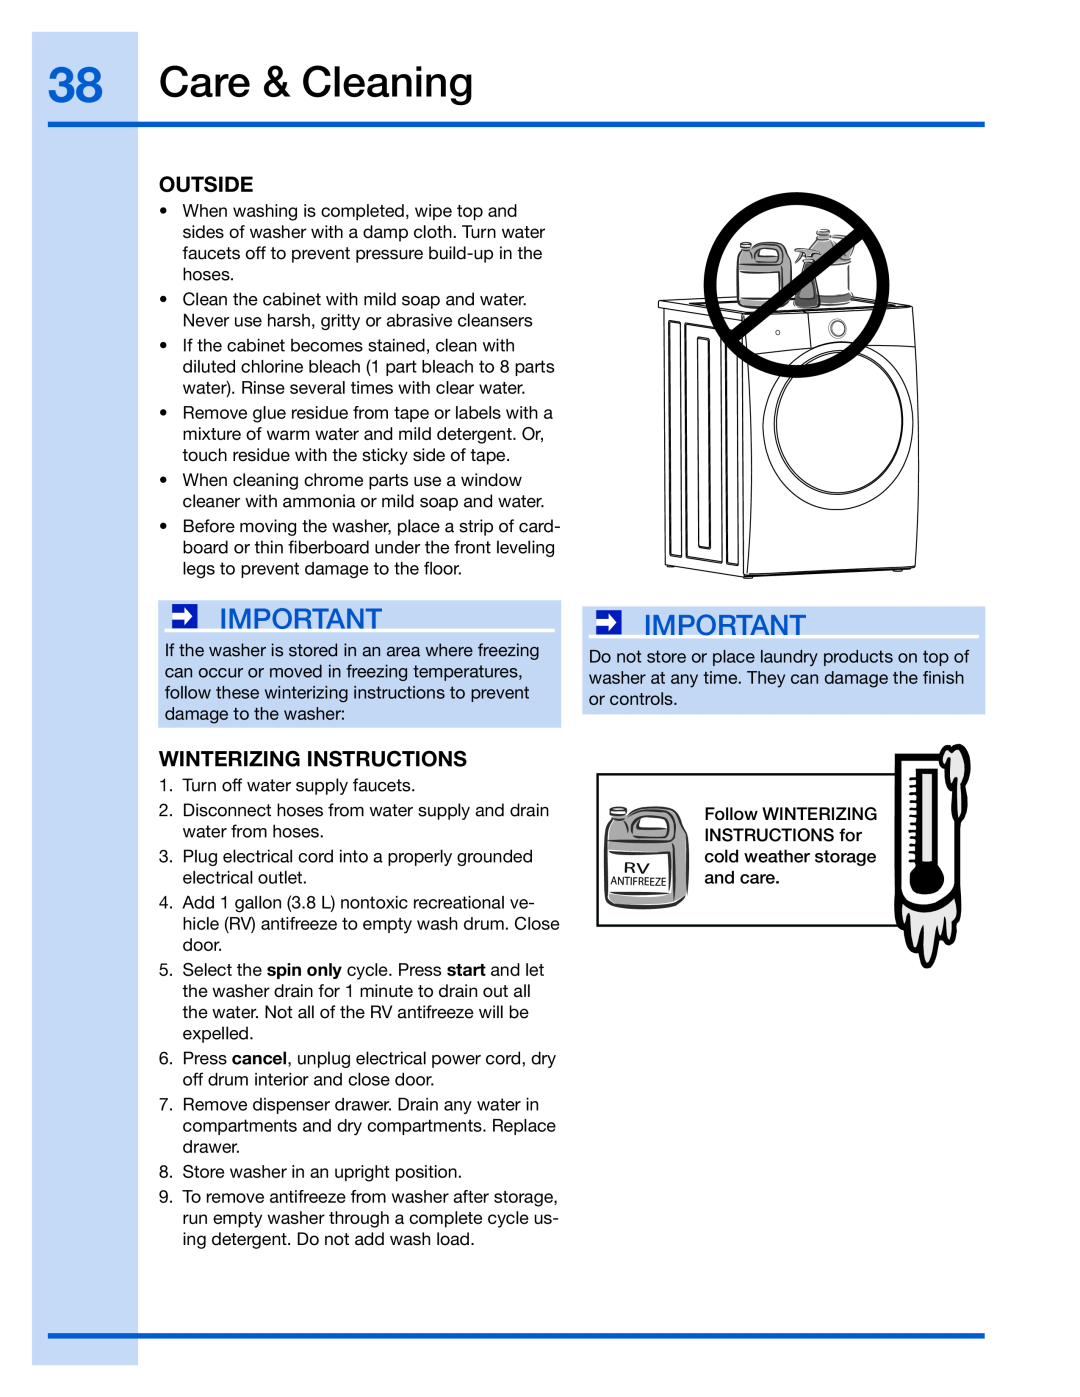 Electrolux 137023200 A manual Care & Cleaning, Outside, Winterizing Instructions 